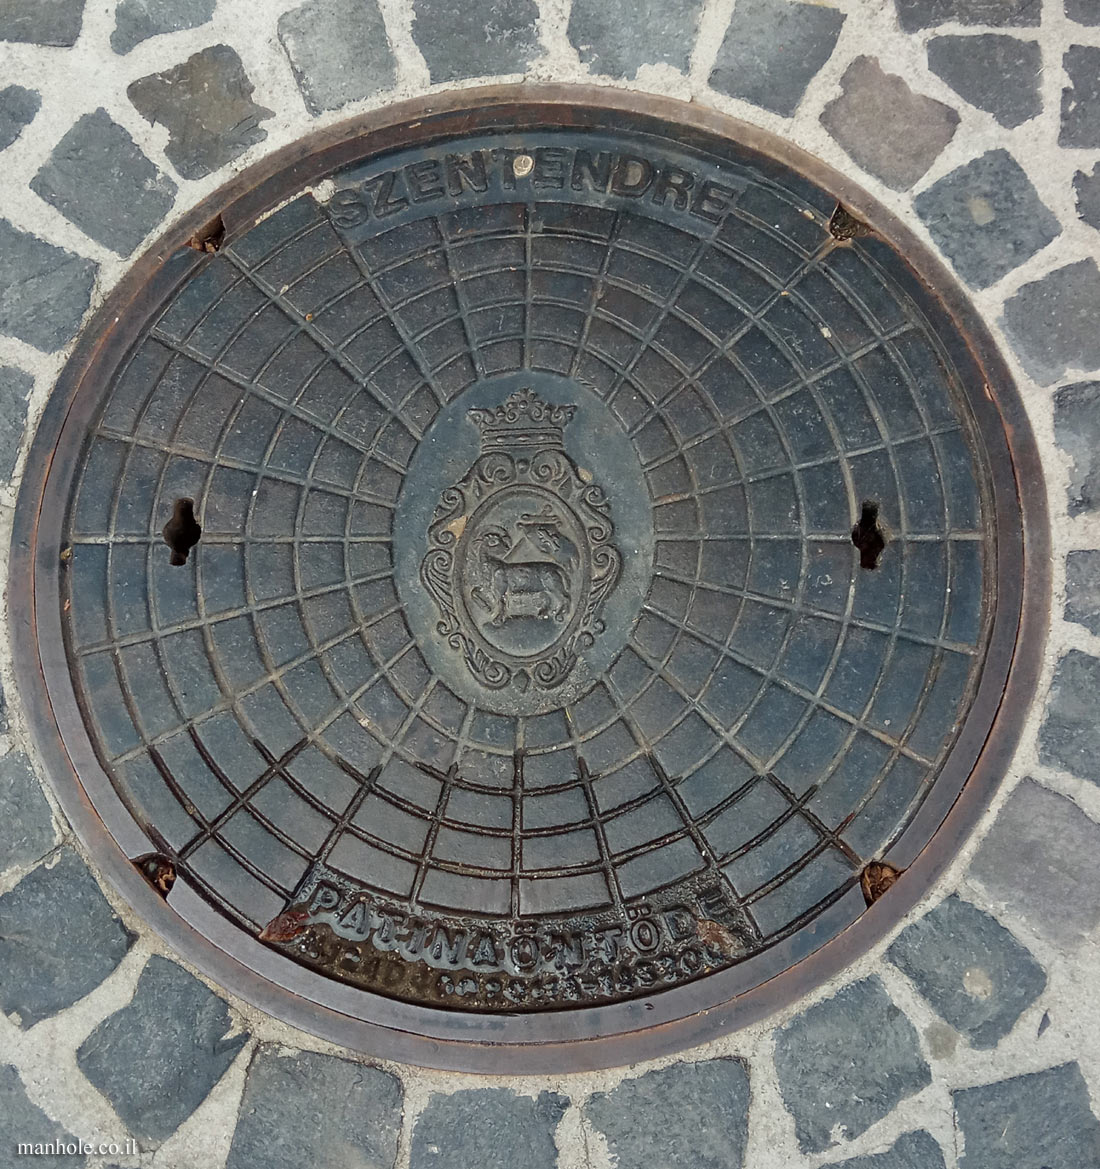 Szentendre - A lid with a network of circles and the city symbol in the center